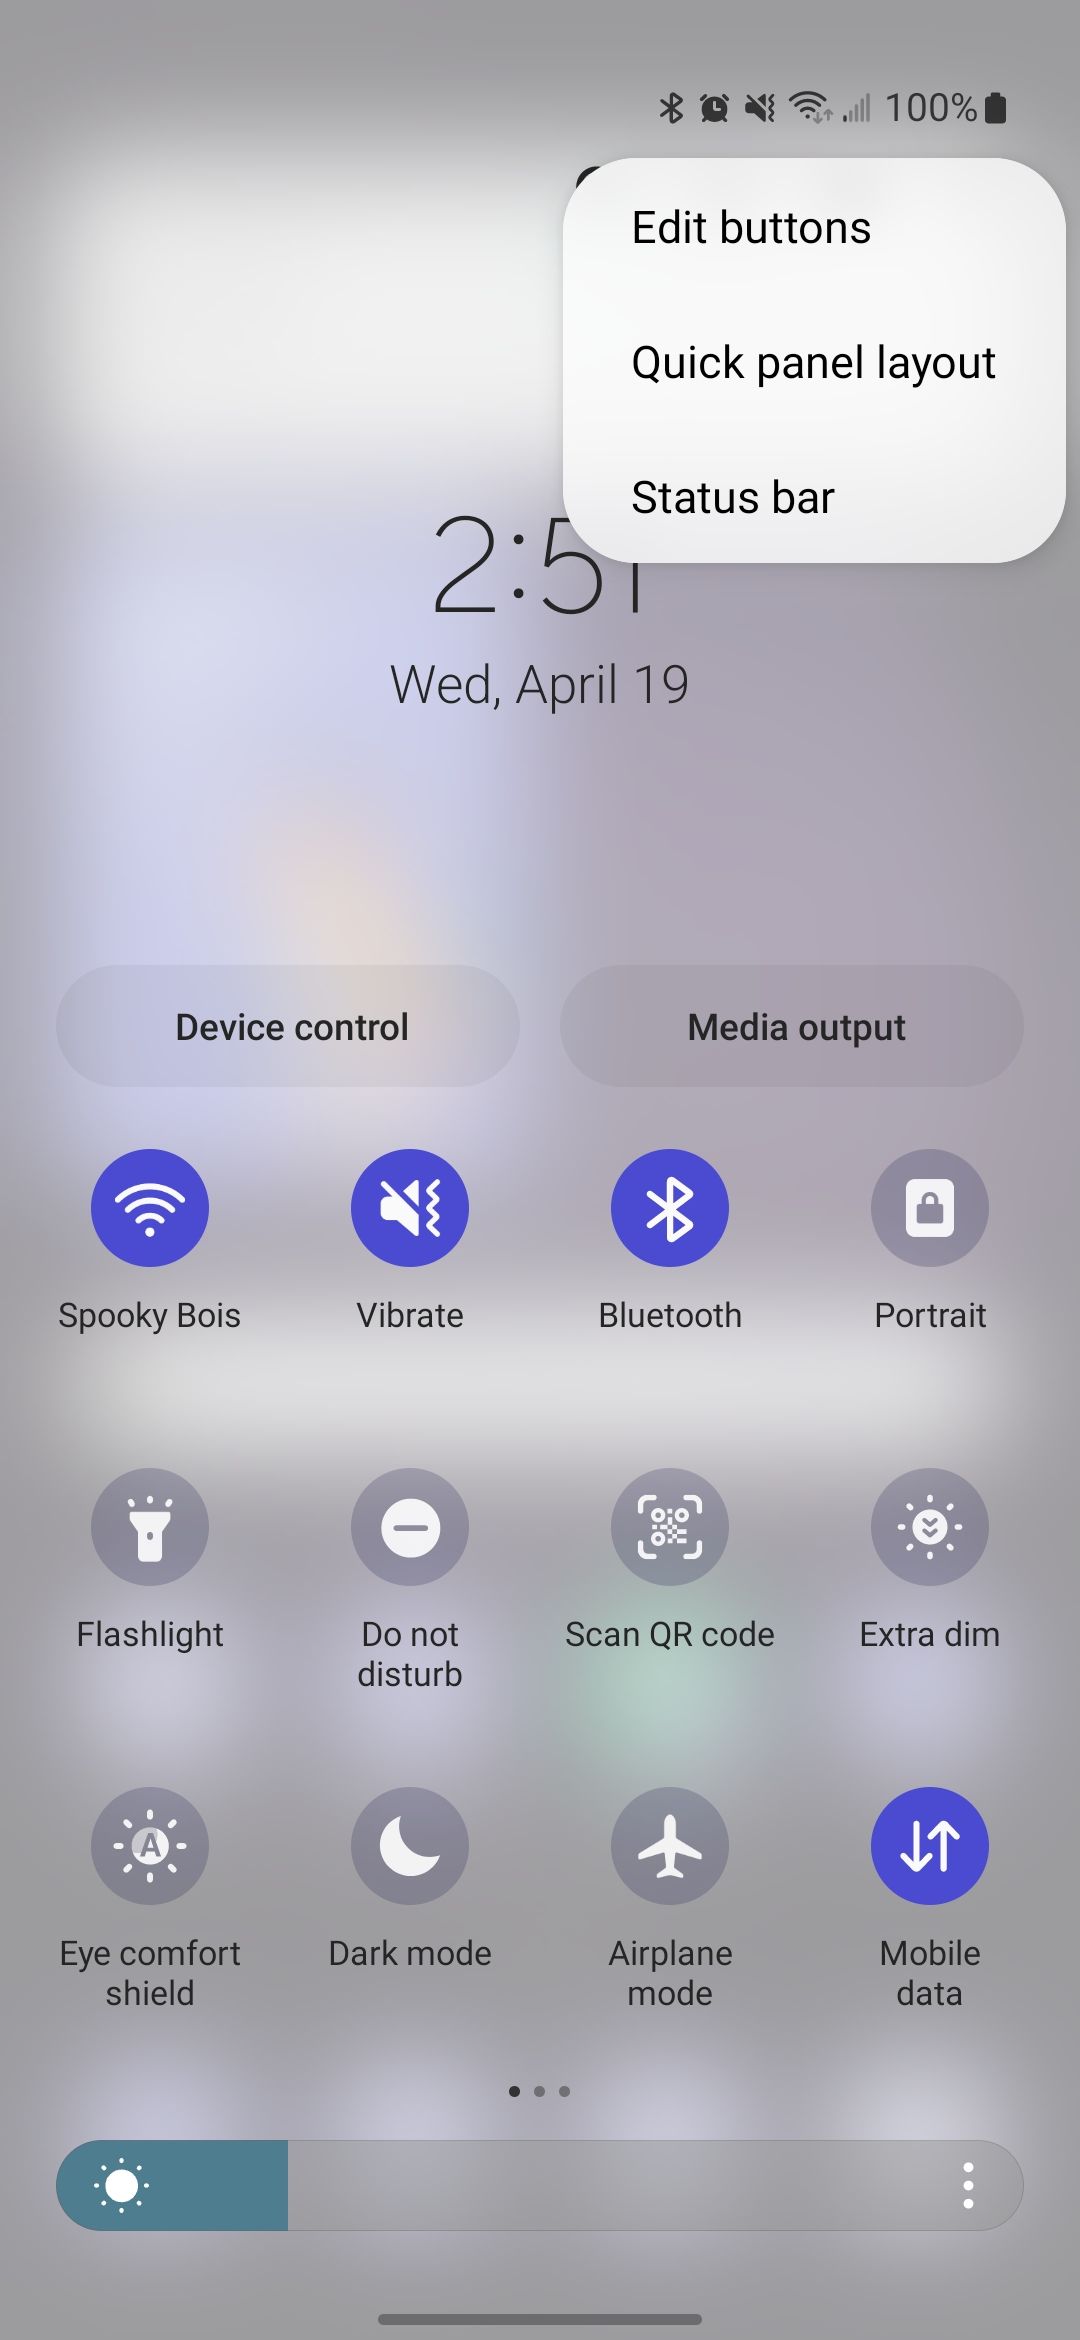 The Quick settings menu on a Samsung phone can be edited with the quick panel layout option